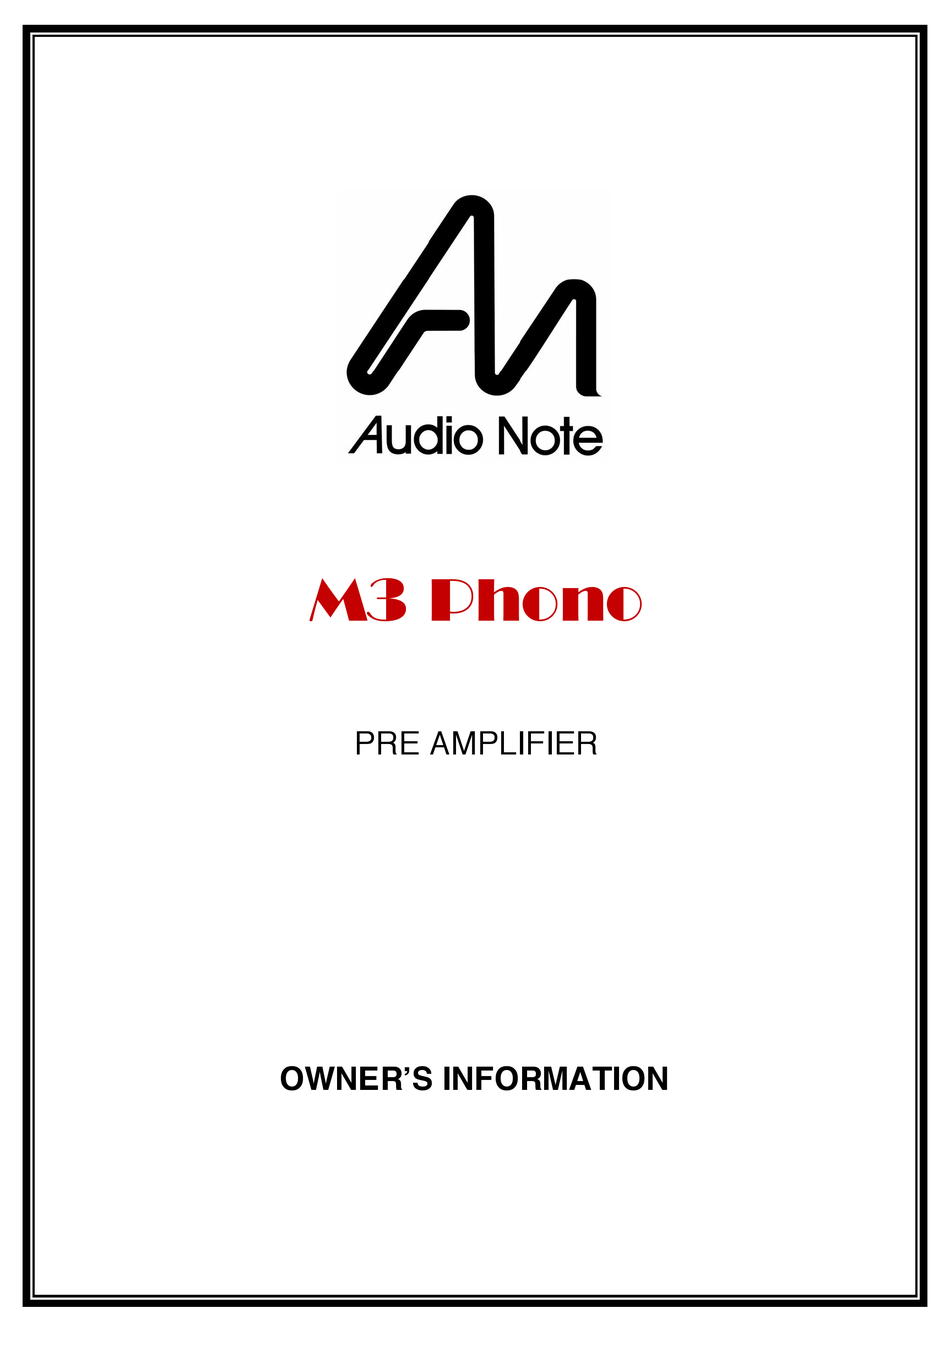 audionote download